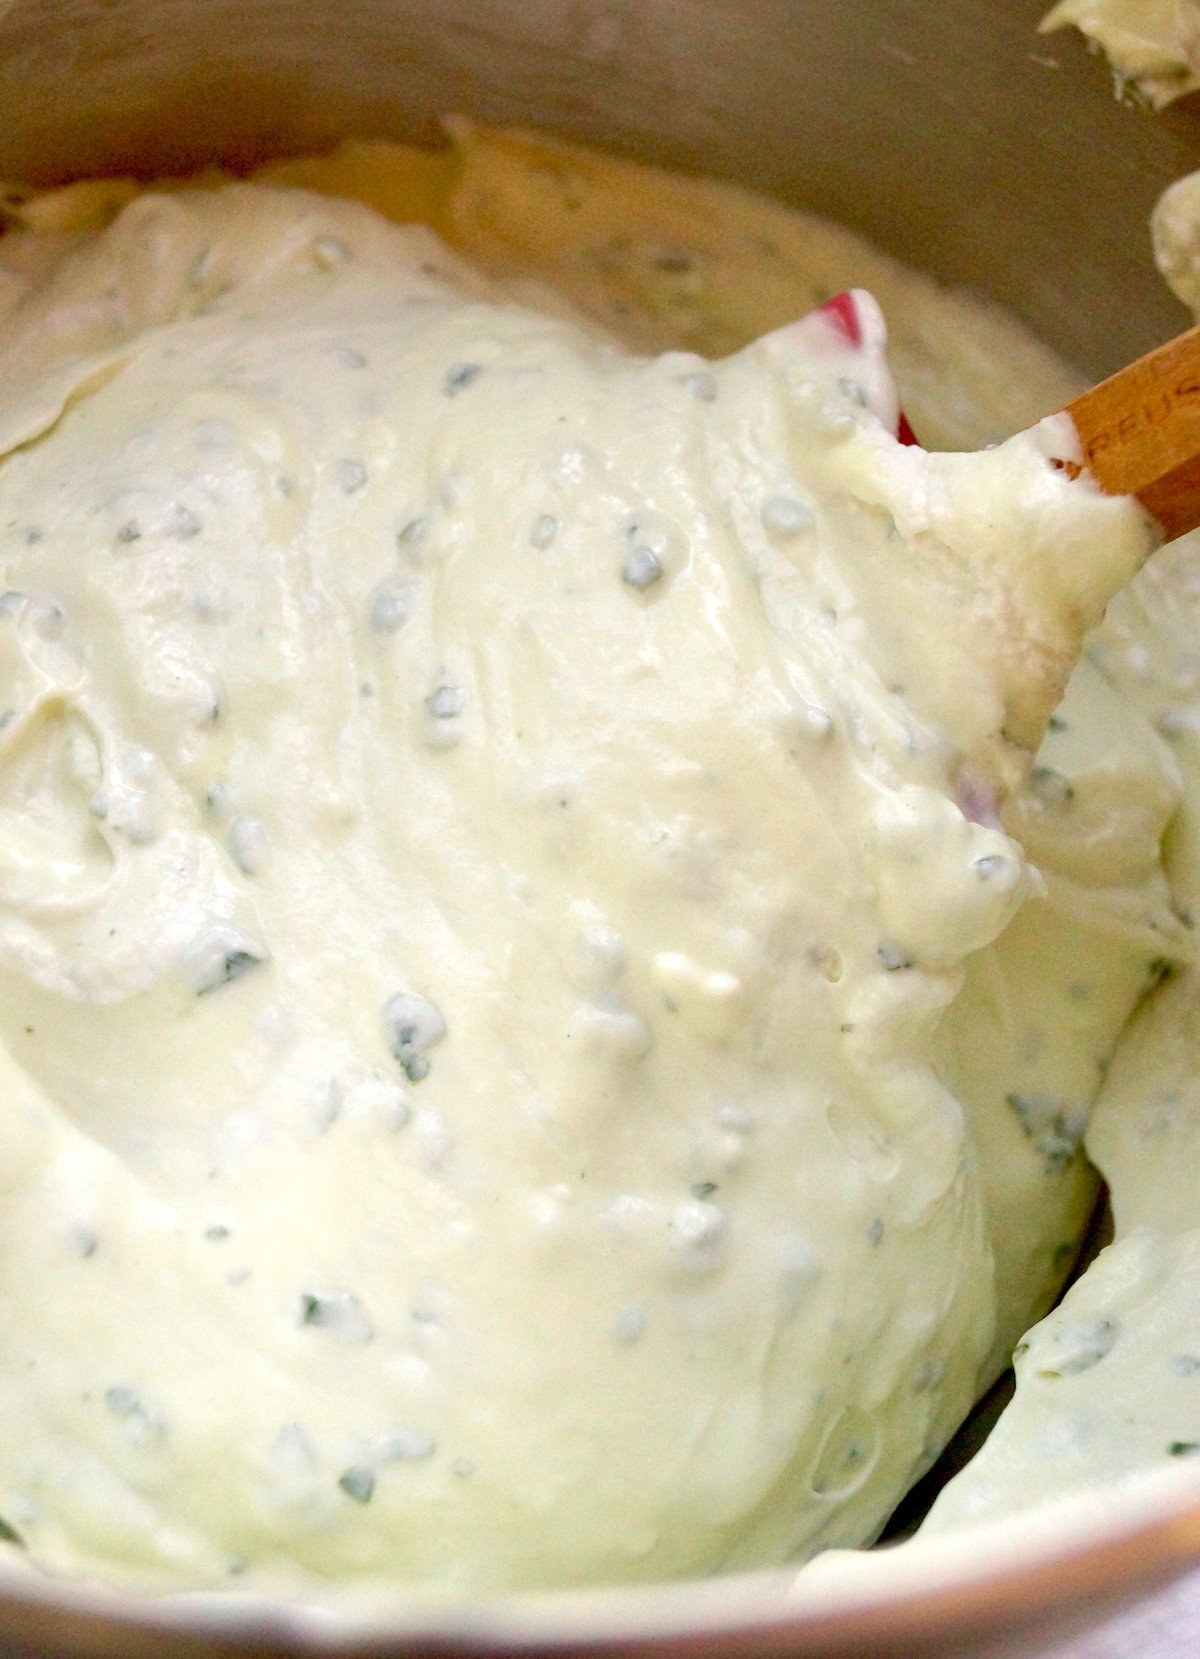 Blended and smooth mixture of whipped cream, cream cheese, sugar and basil.